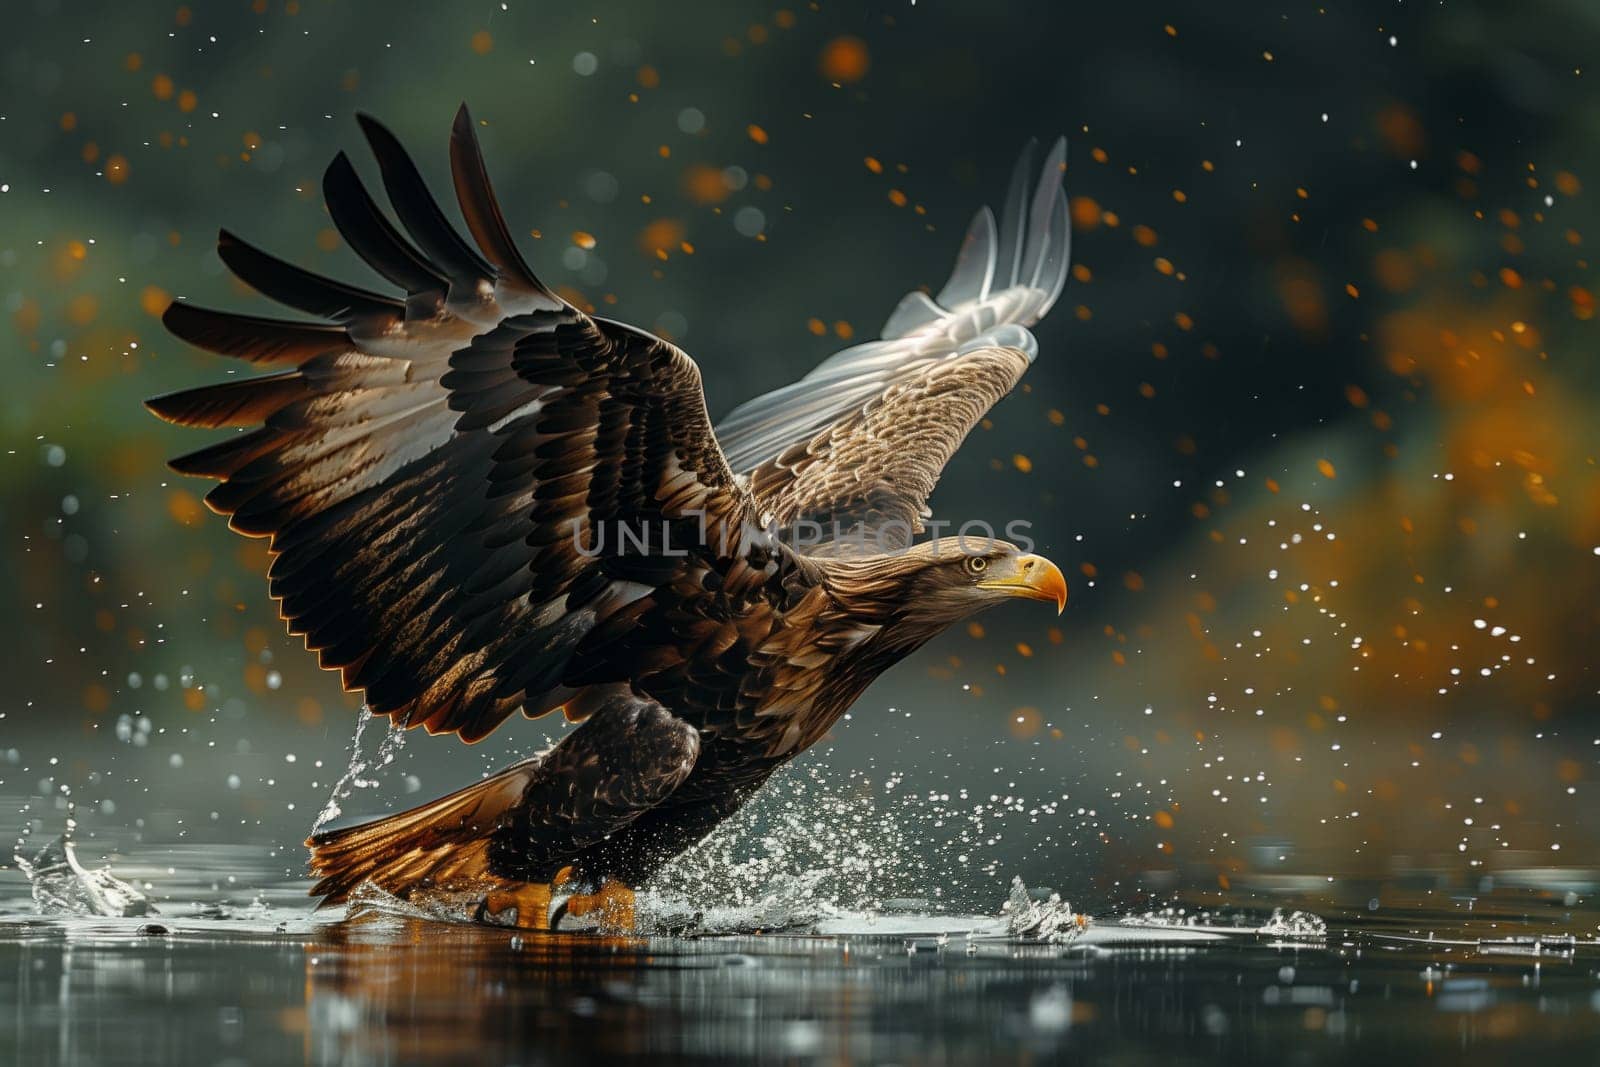 A Bird of prey, specifically a bald eagle from the family Accipitridae and order Accipitriformes, is gliding over a body of water with its beak and feathers elegantly reflecting in the fluid below